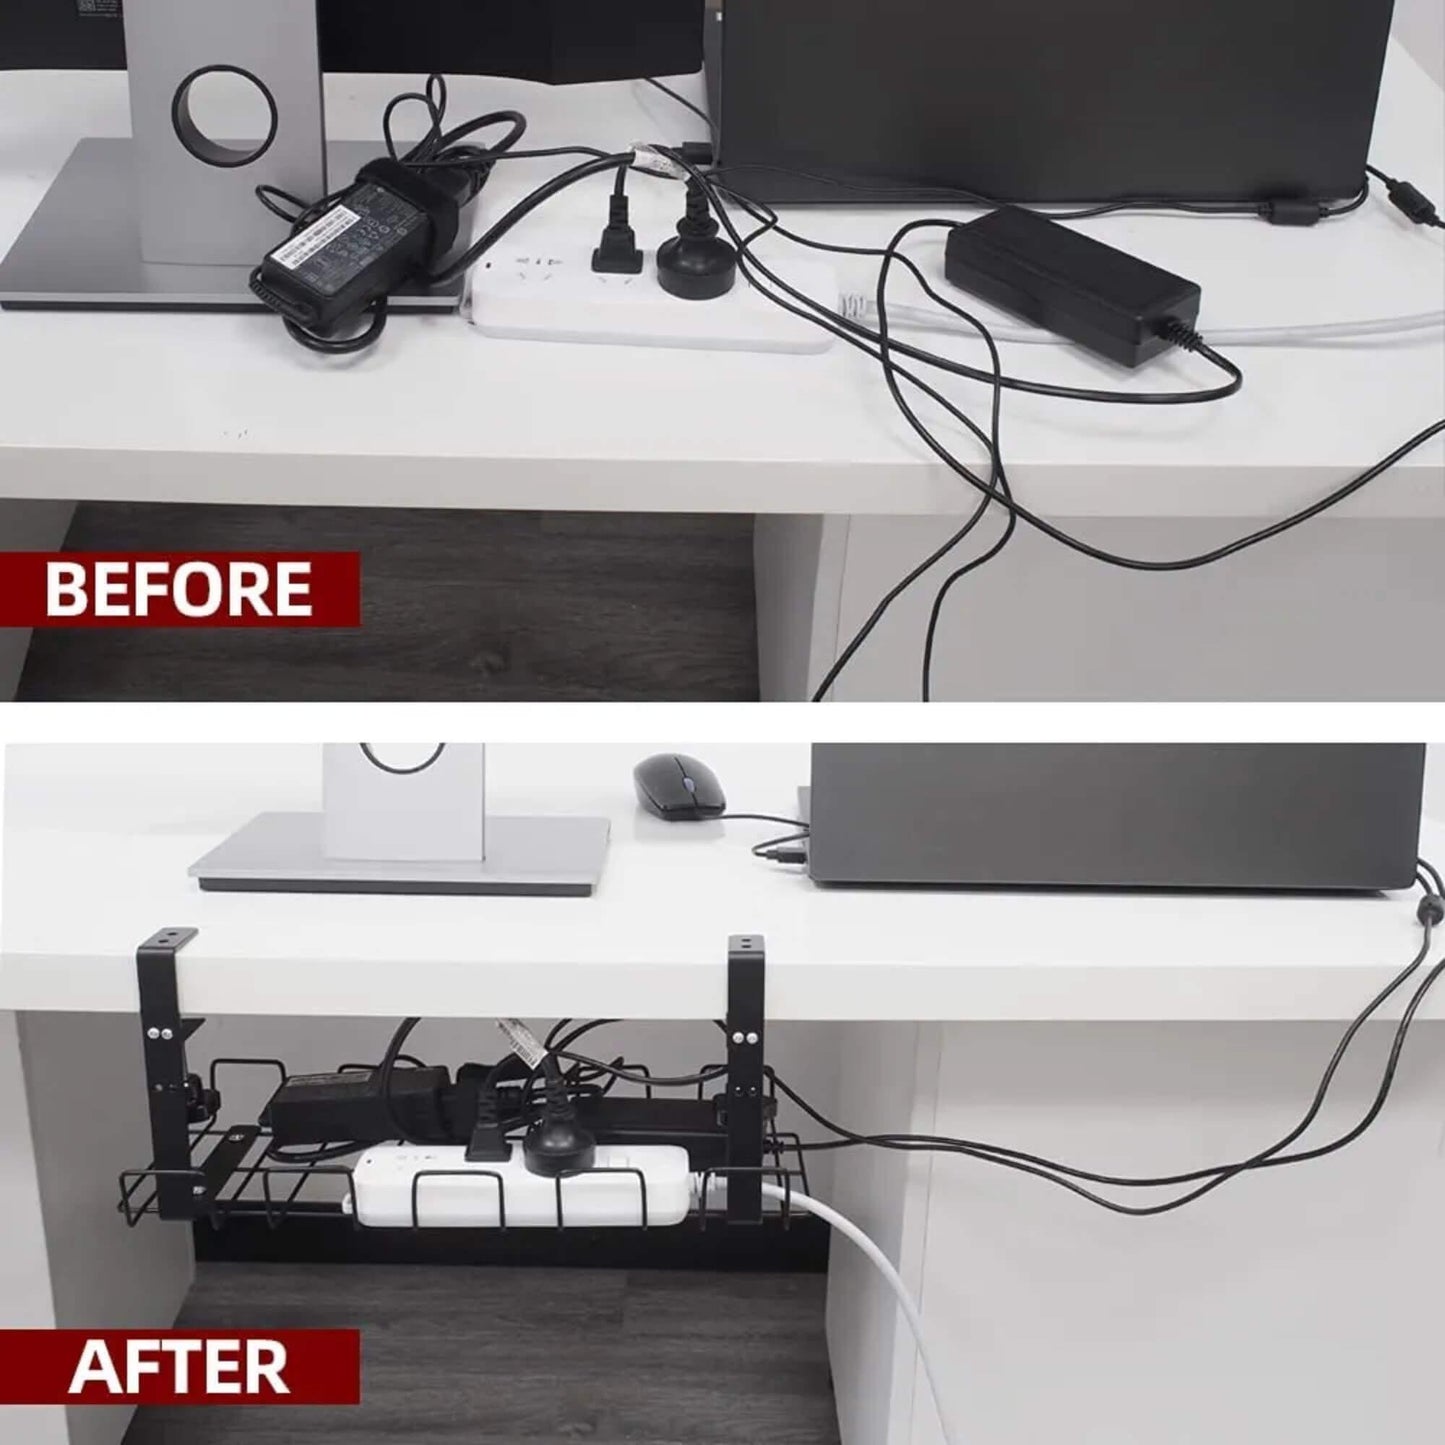 Cable Management Tray Organizer Under Desk for Office and Home No Drill - GADGET WAGON Desk Arm